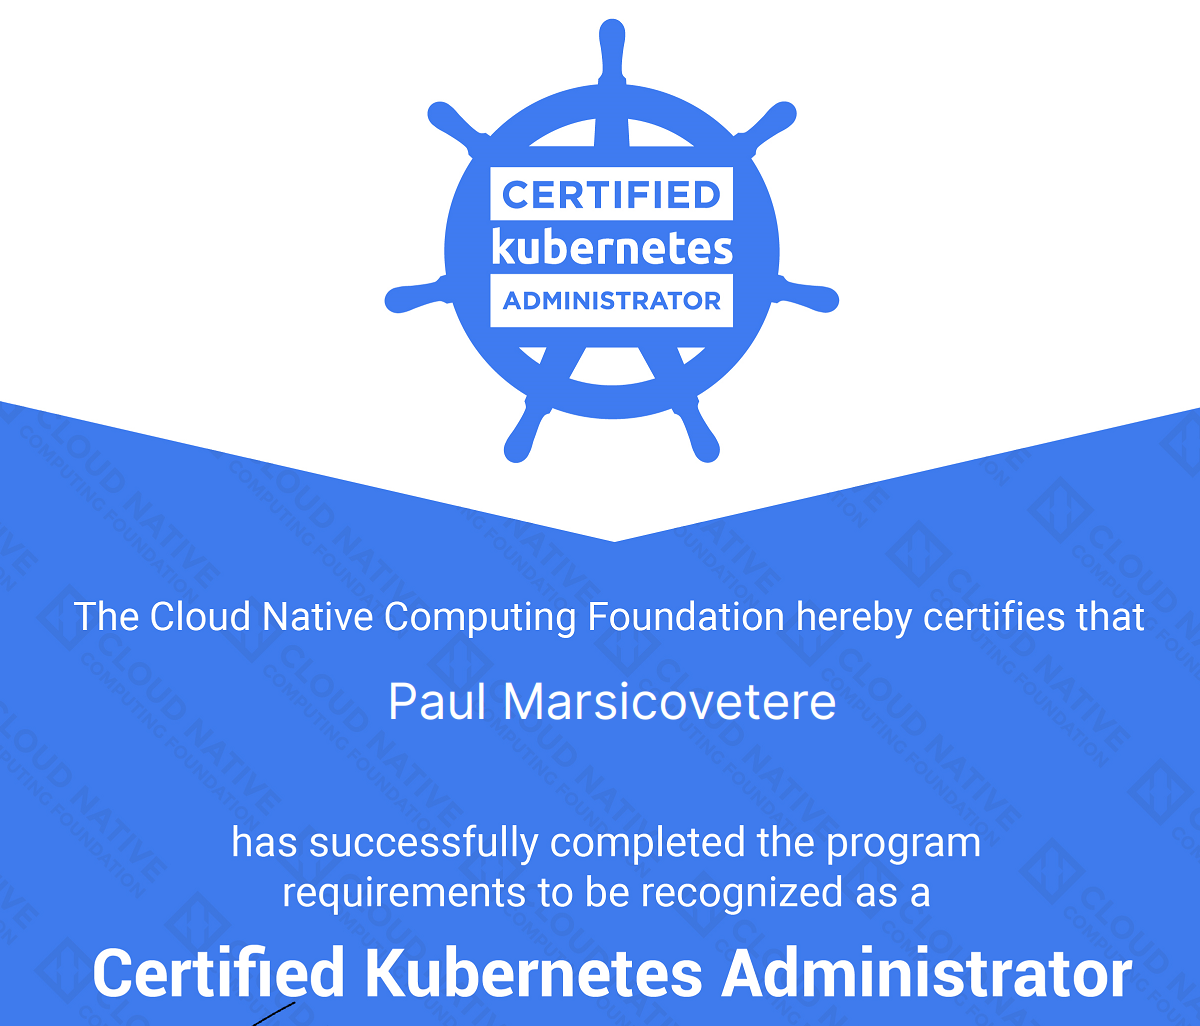 Tips for passing the Certified Kubernetes Administrator (CKA) Exam